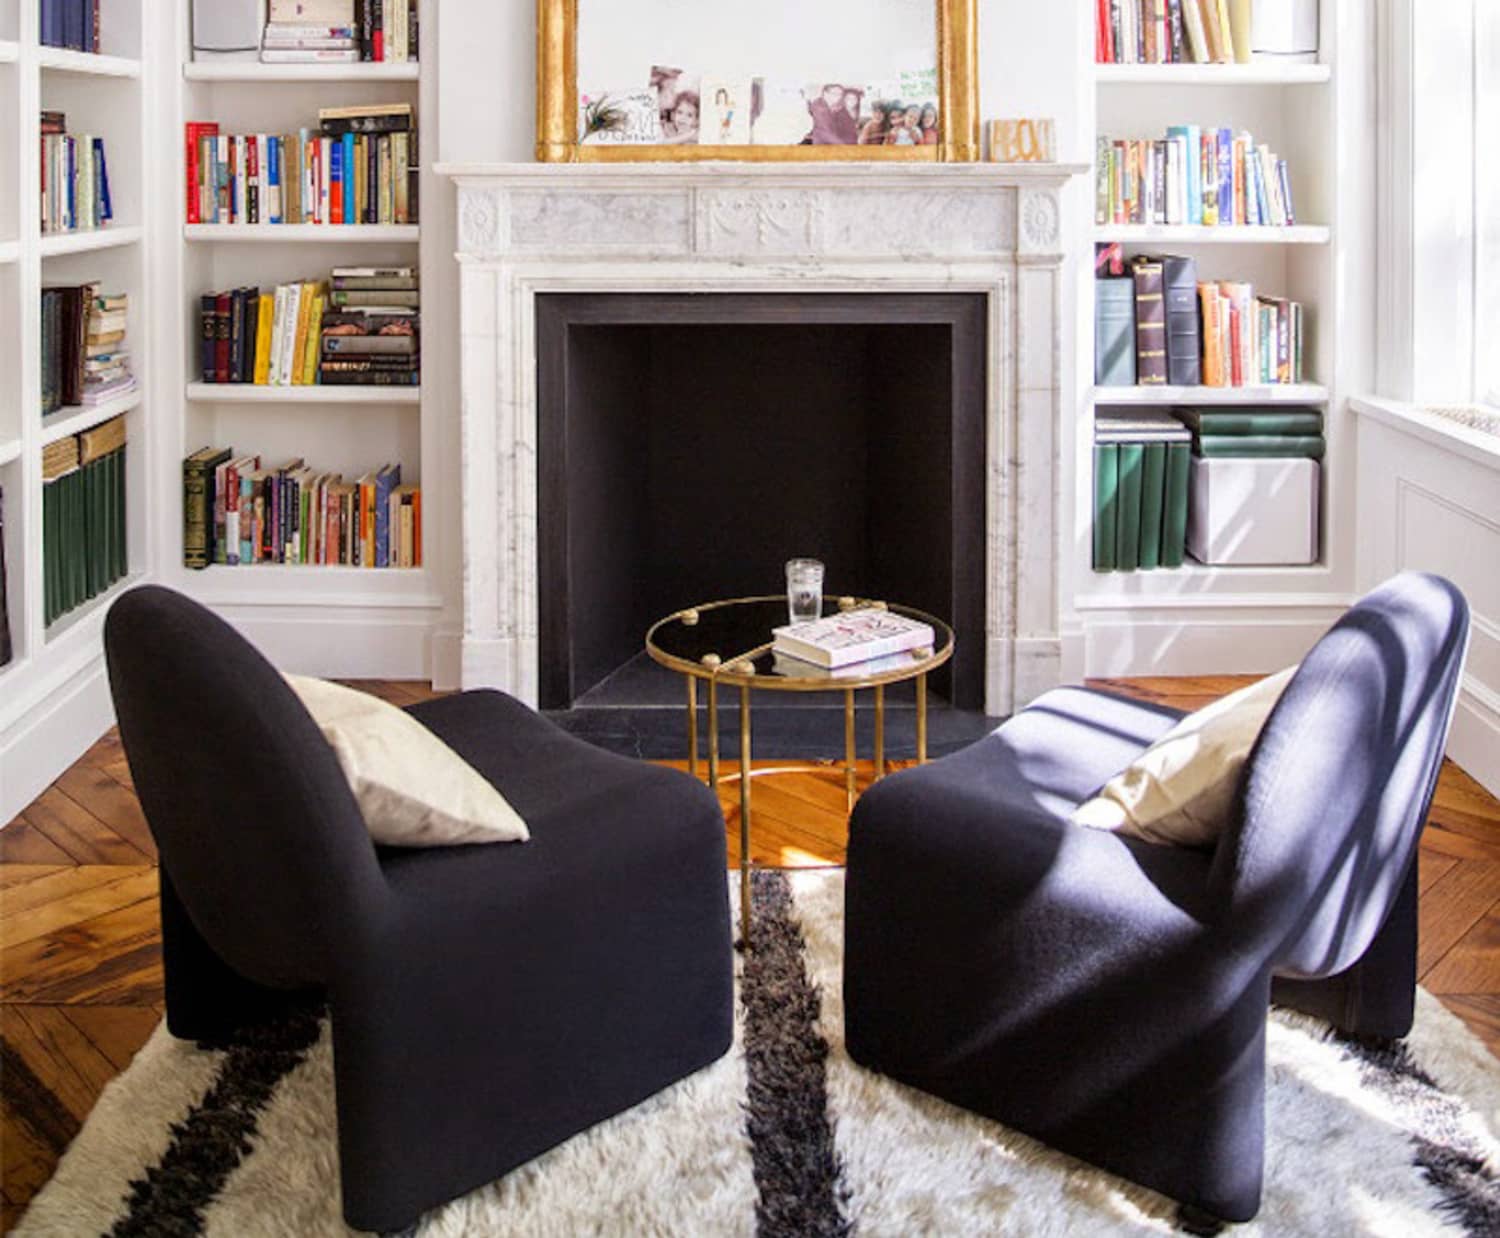 How To Set Up Your Living Room Without A Focus On The Tv Apartment Therapy